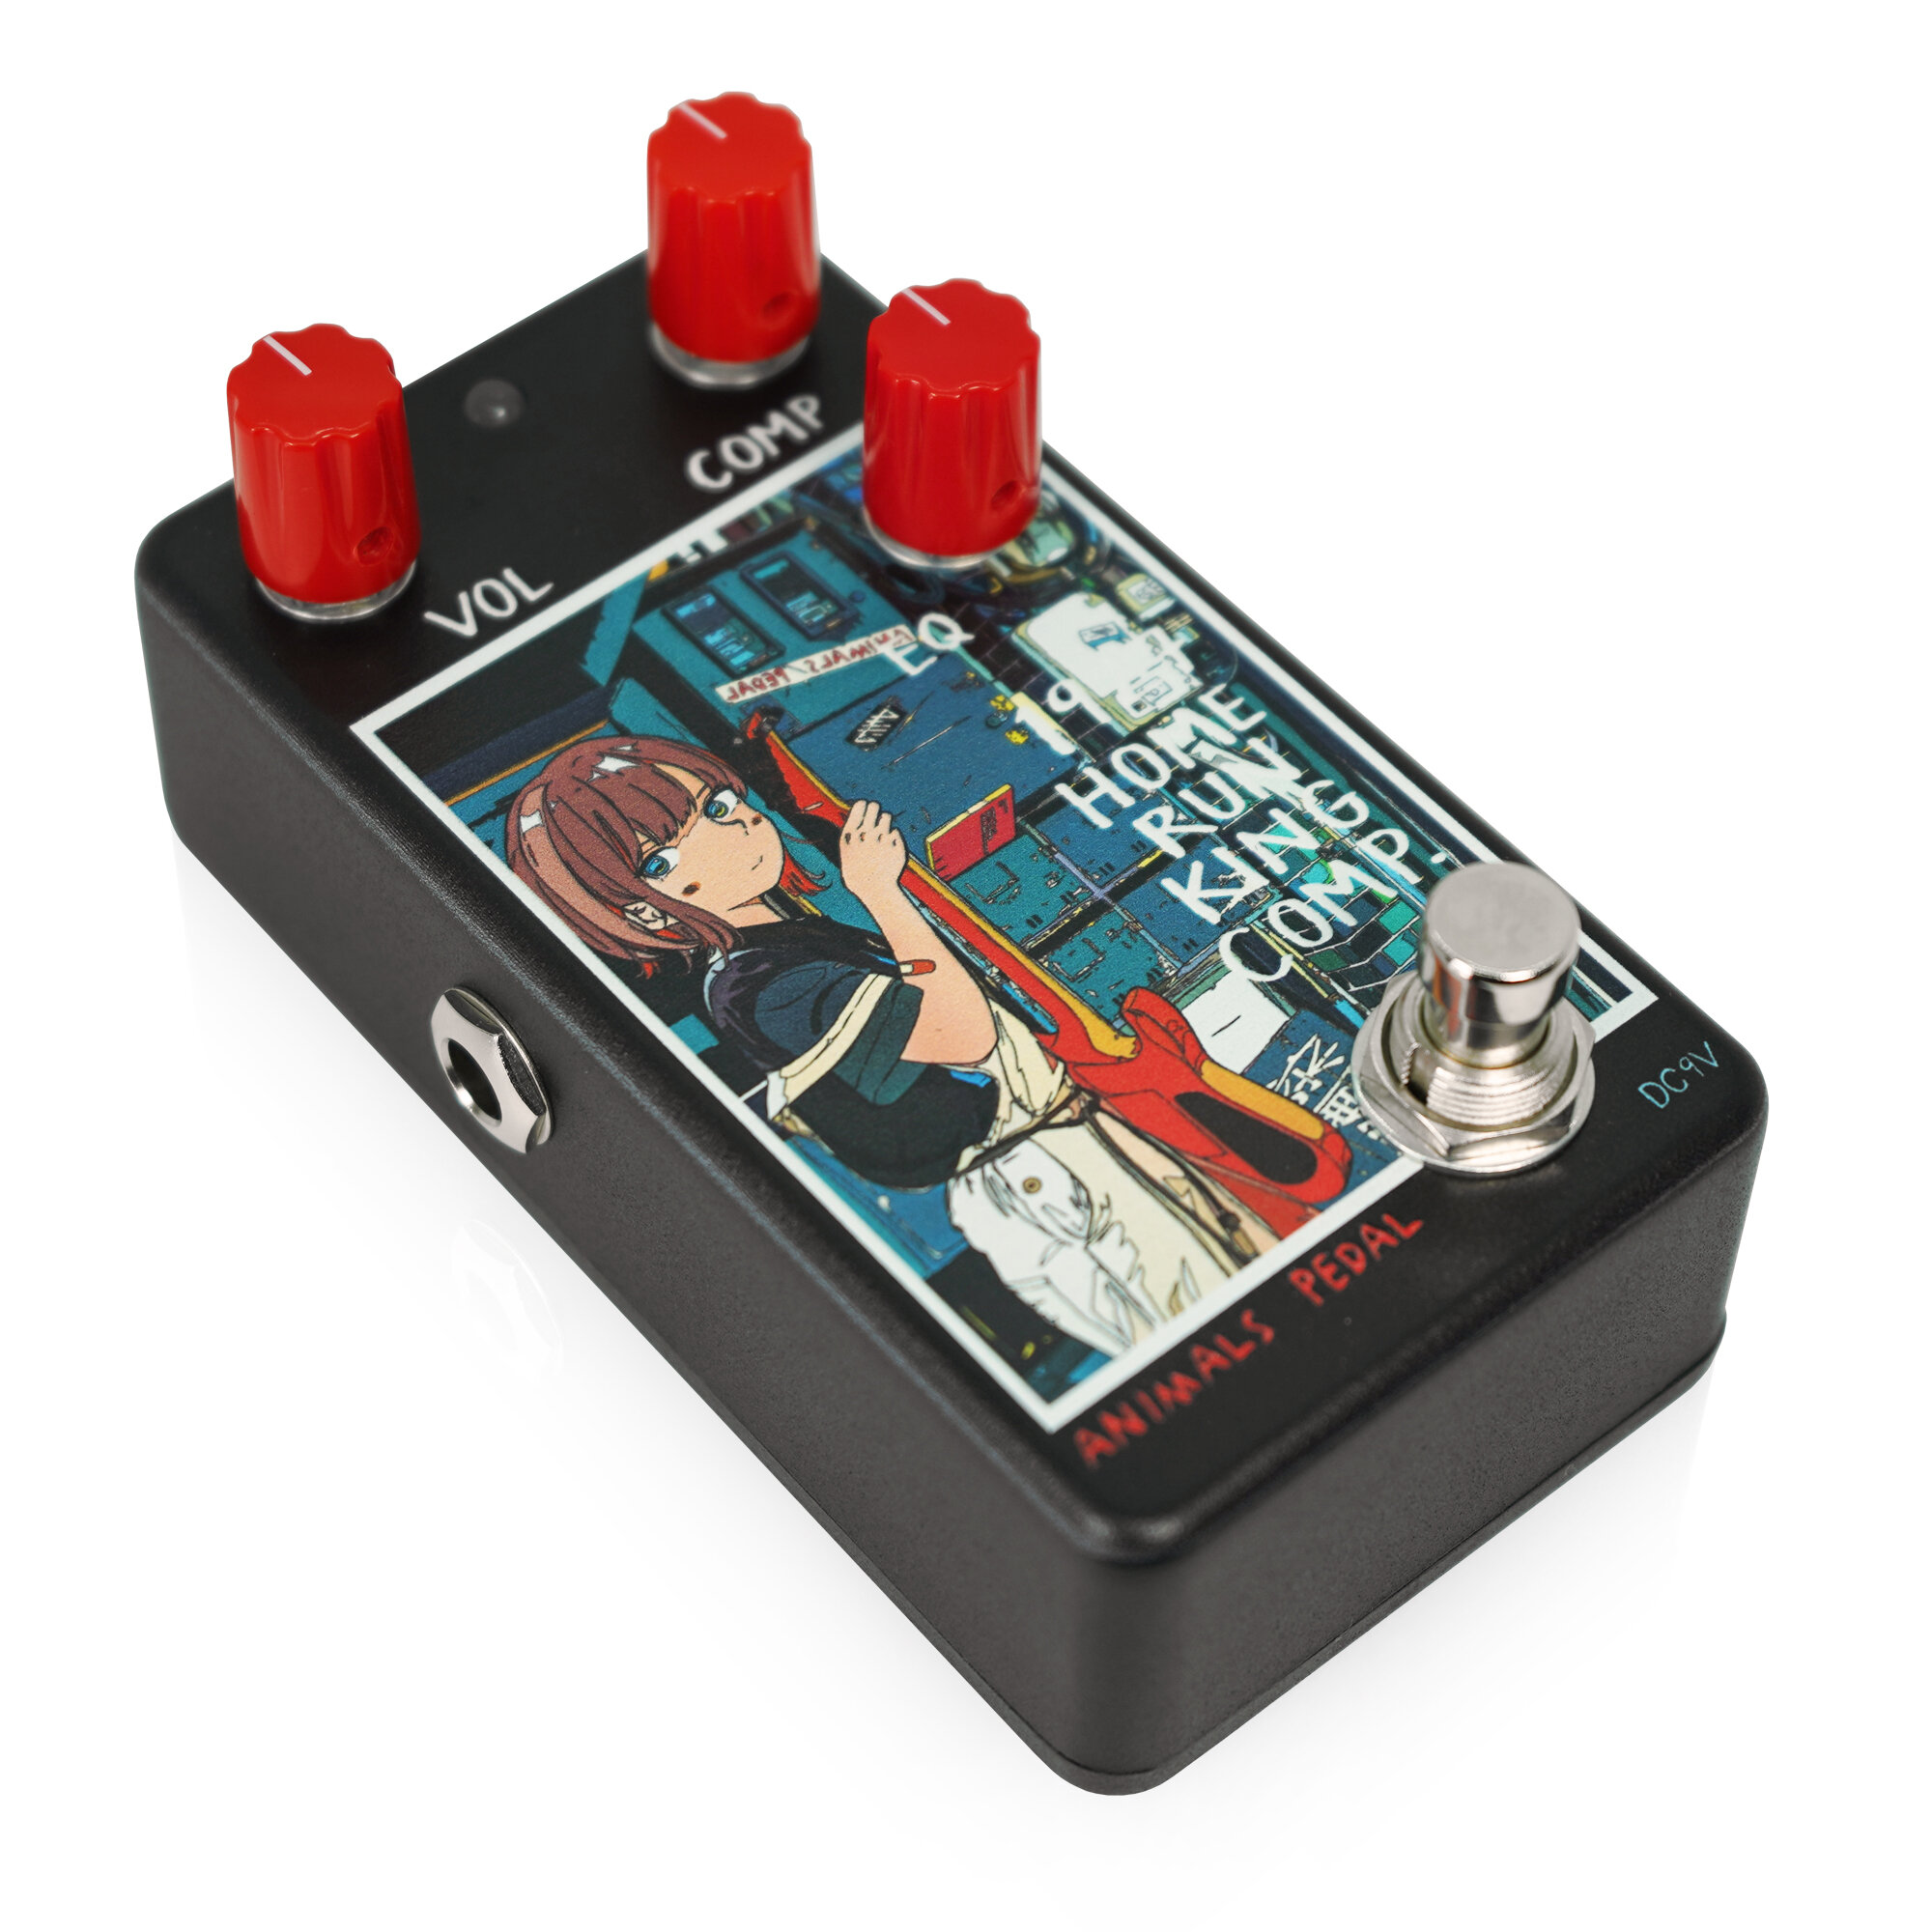 Animals Pedal / Custom Illustrated 032 1927 Home Run King Comp. by 